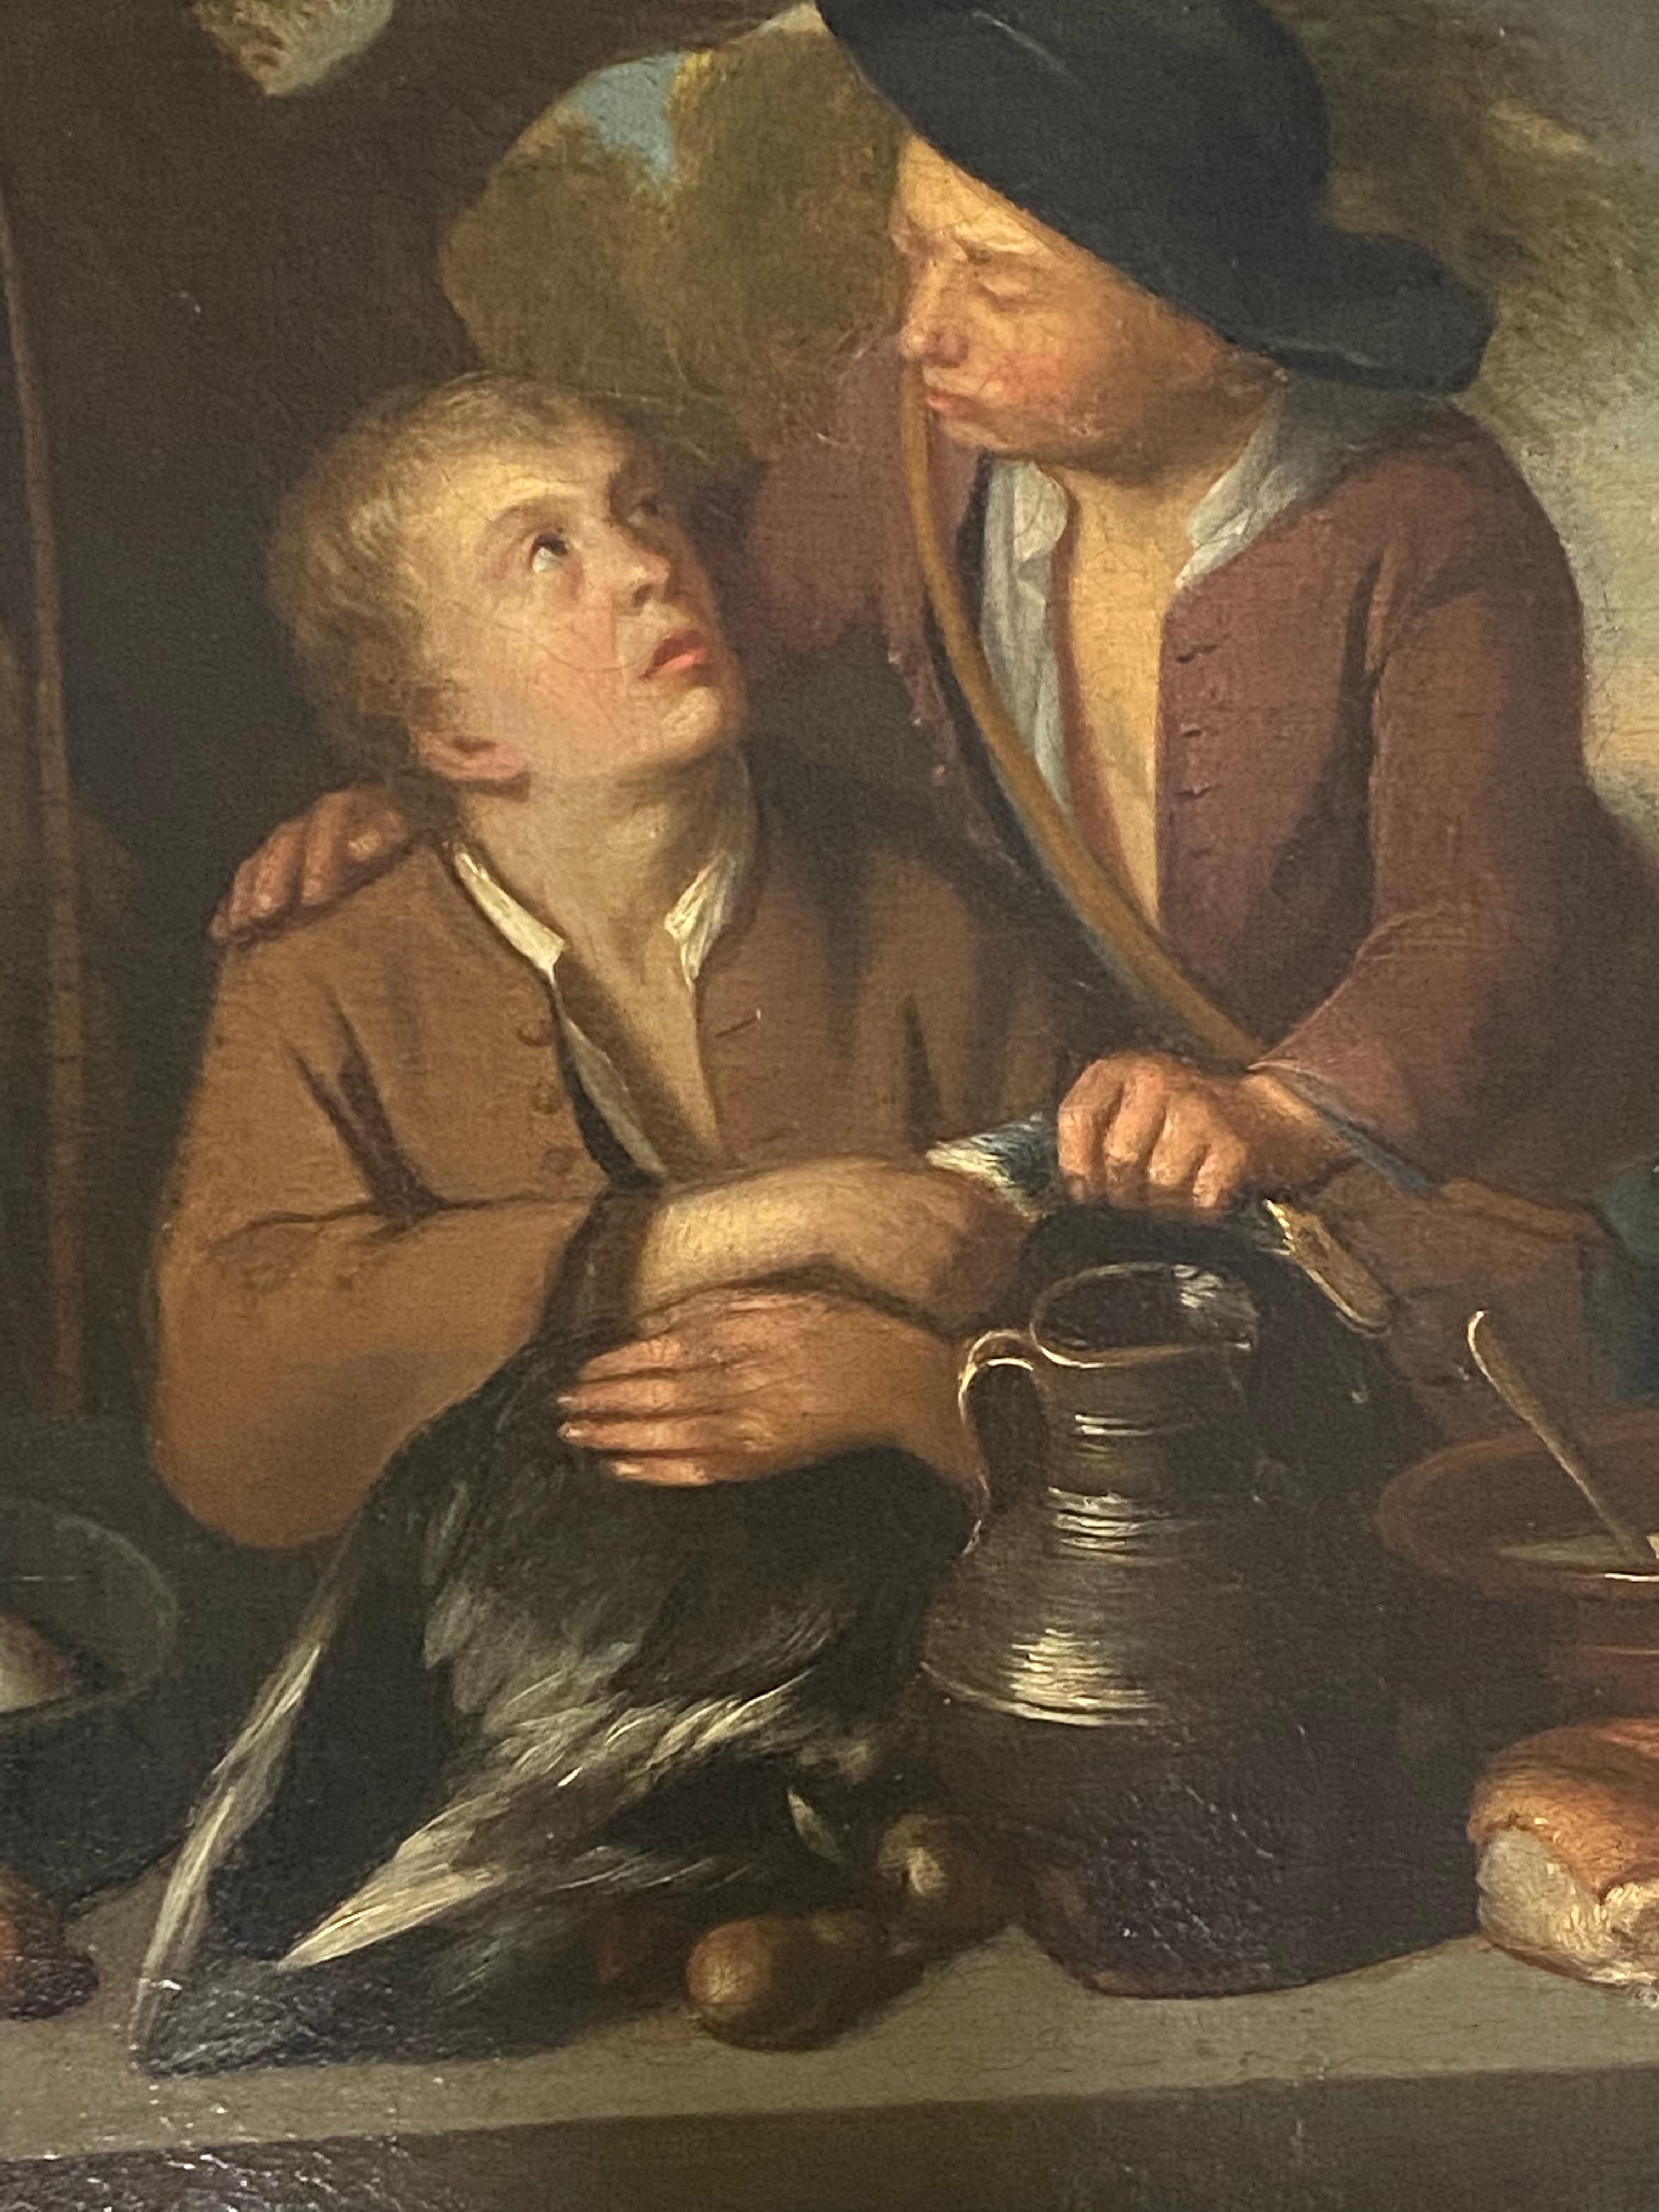 Outstanding Dutch School oil painting, with a touch of Old Master sensibilities.

The quality of this painting cannot be overstated.

Behind the seated boy is a bow, which was the weapon most likely used to secure the duck.

At the table is